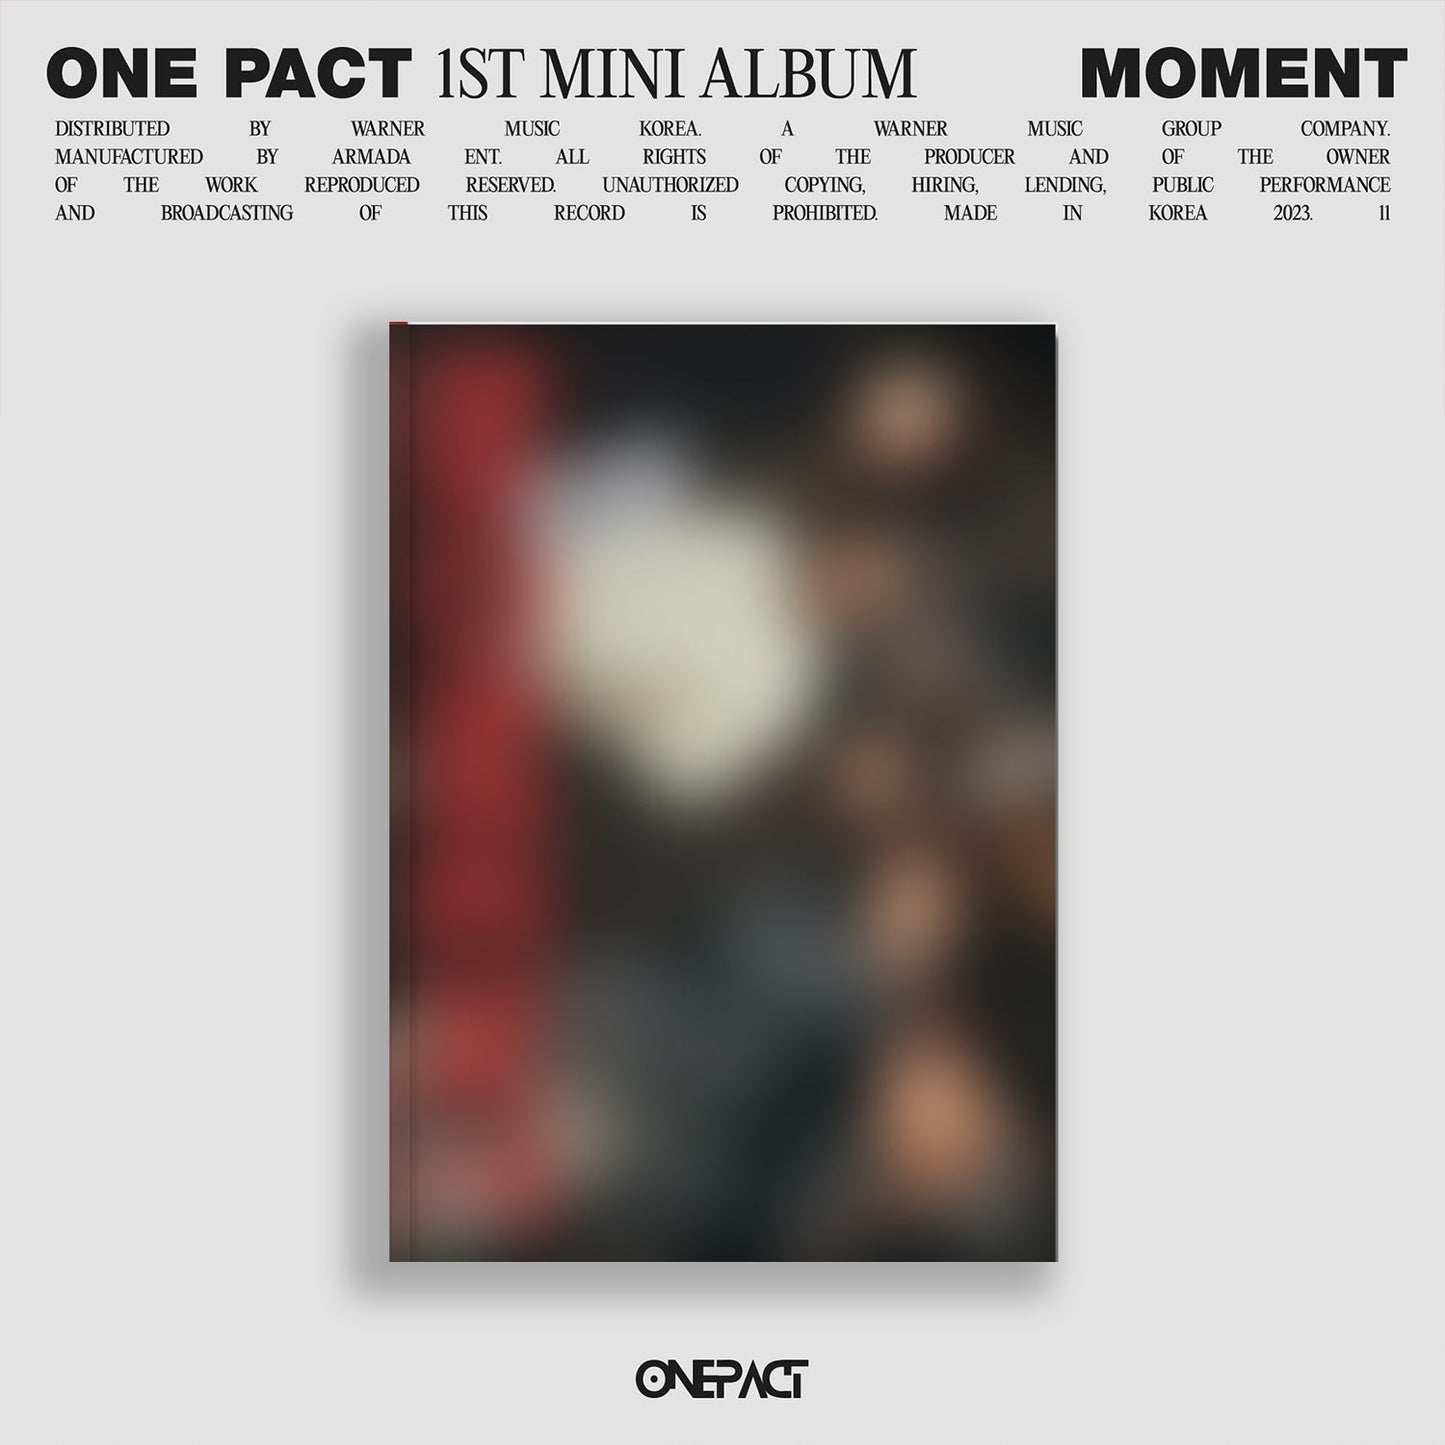 ONE PACT 1ST MINI ALBUM 'MOMENT' HIP VERSION COVER